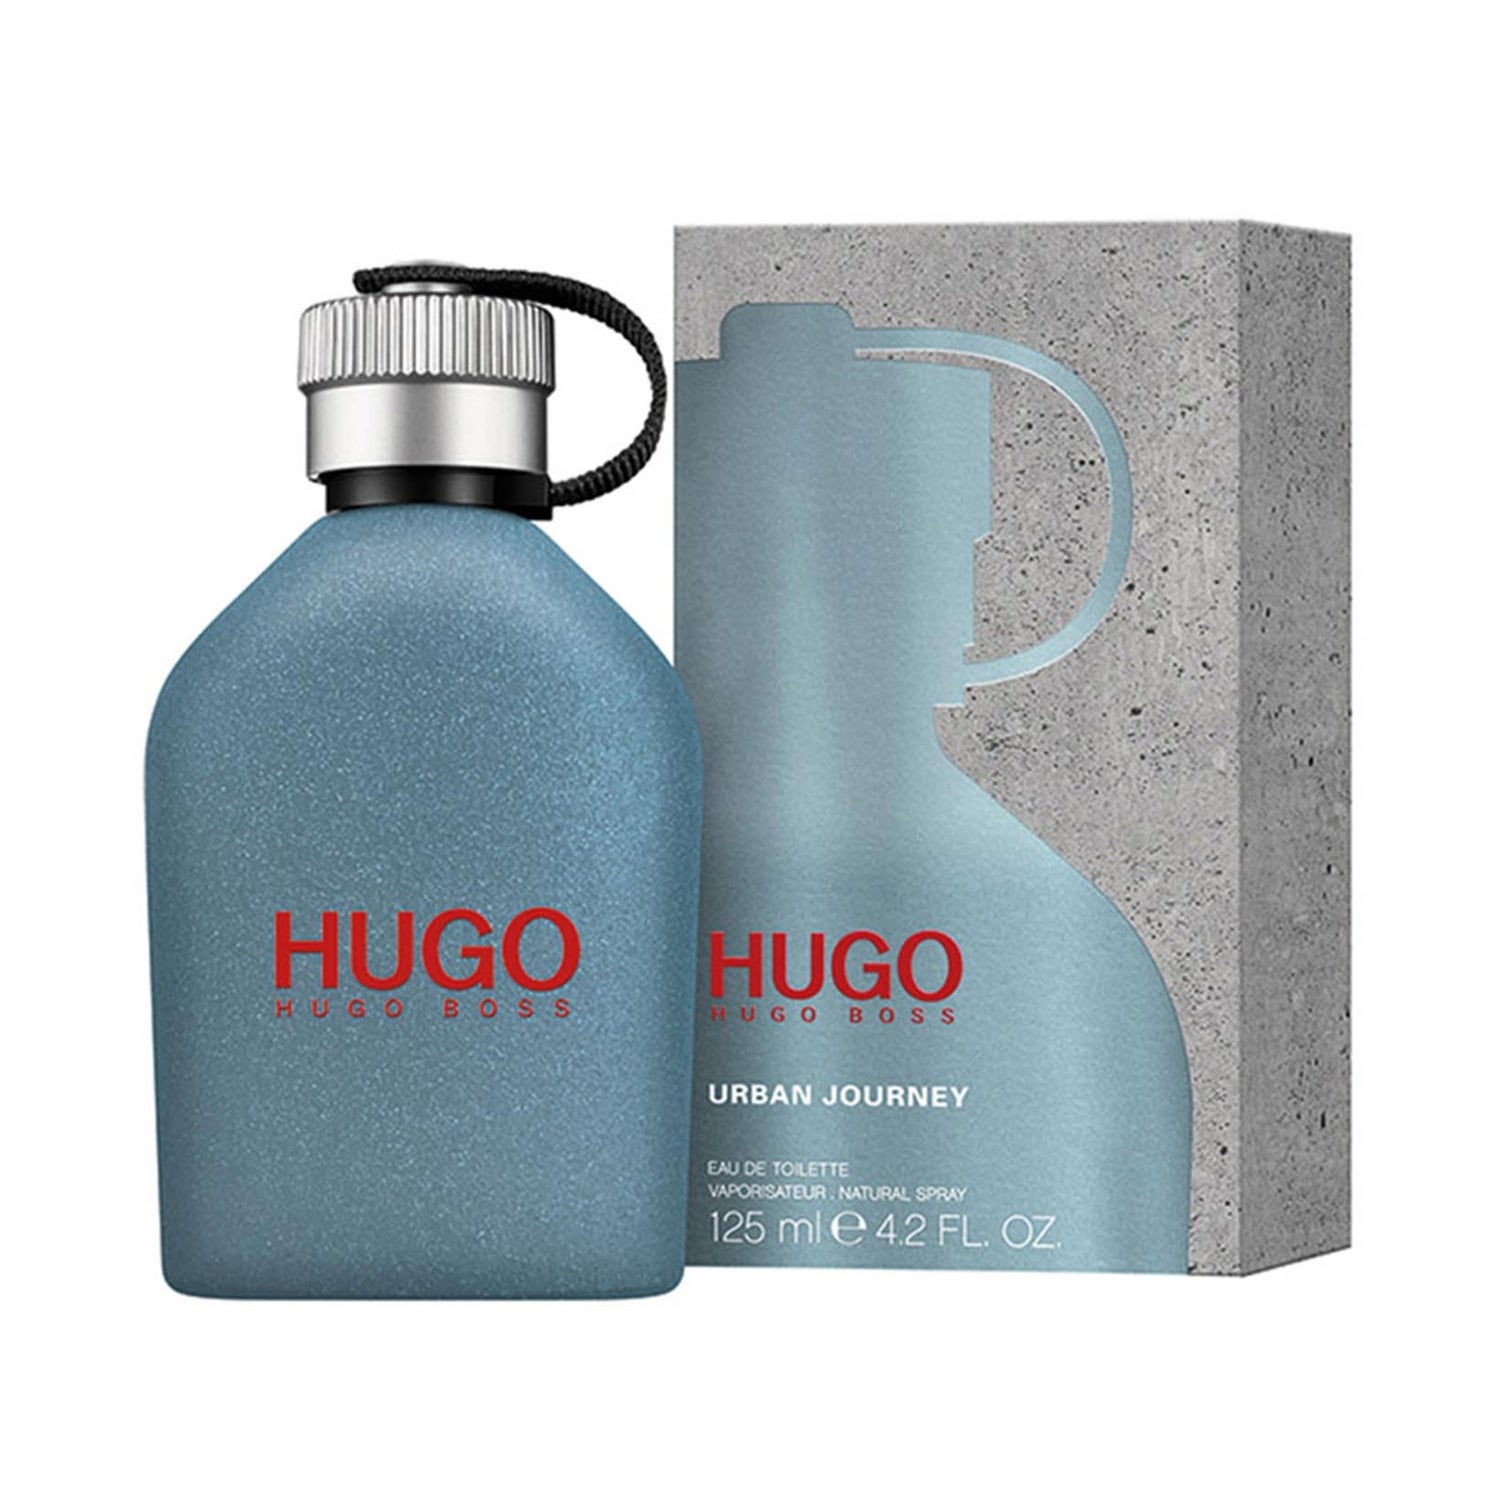 hugo boss urban journey Cheaper Than Retail Price\u003e Buy Clothing,  Accessories and lifestyle products for women \u0026 men -